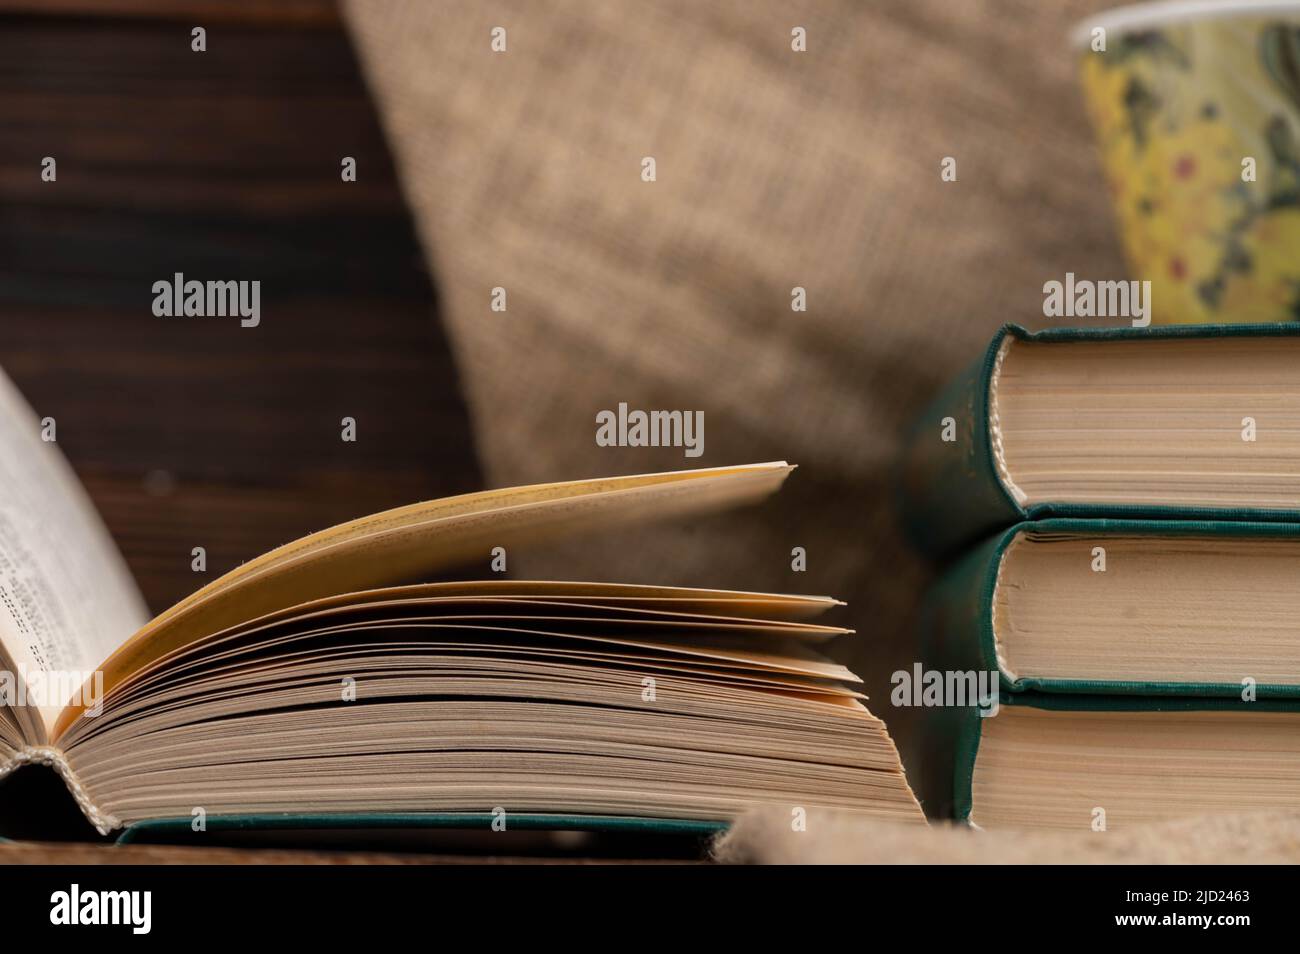 A cup of strong tea on a saucer and a stack of books on the table. Stock Photo